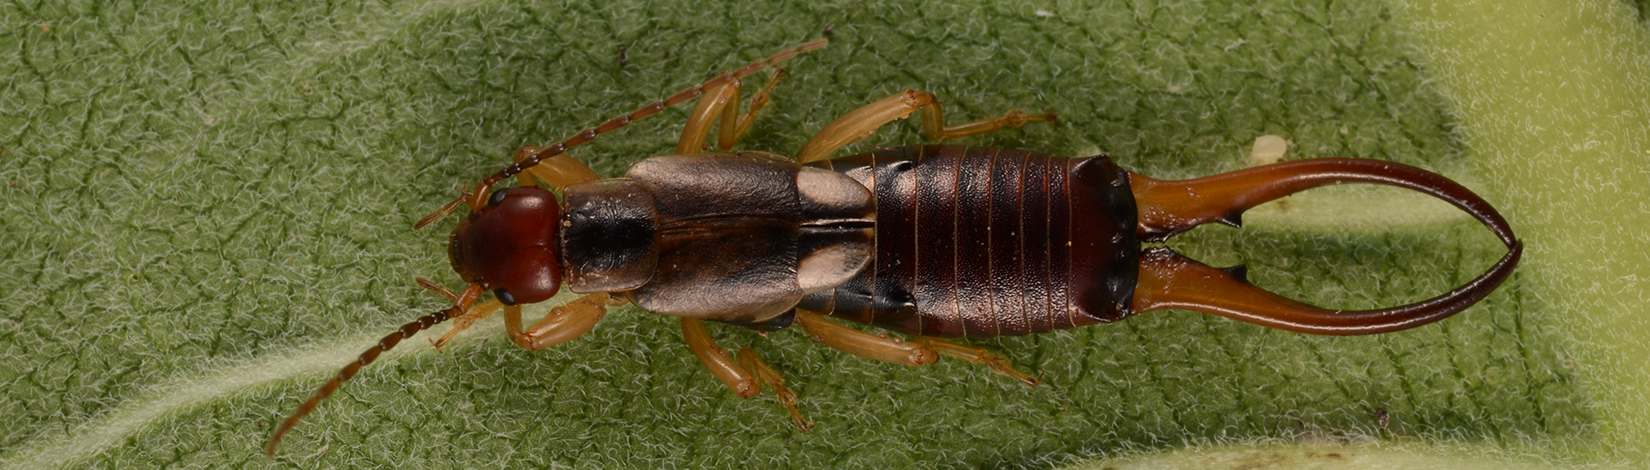 a photo of a Forficula auricularia male taken by Lyle Buss